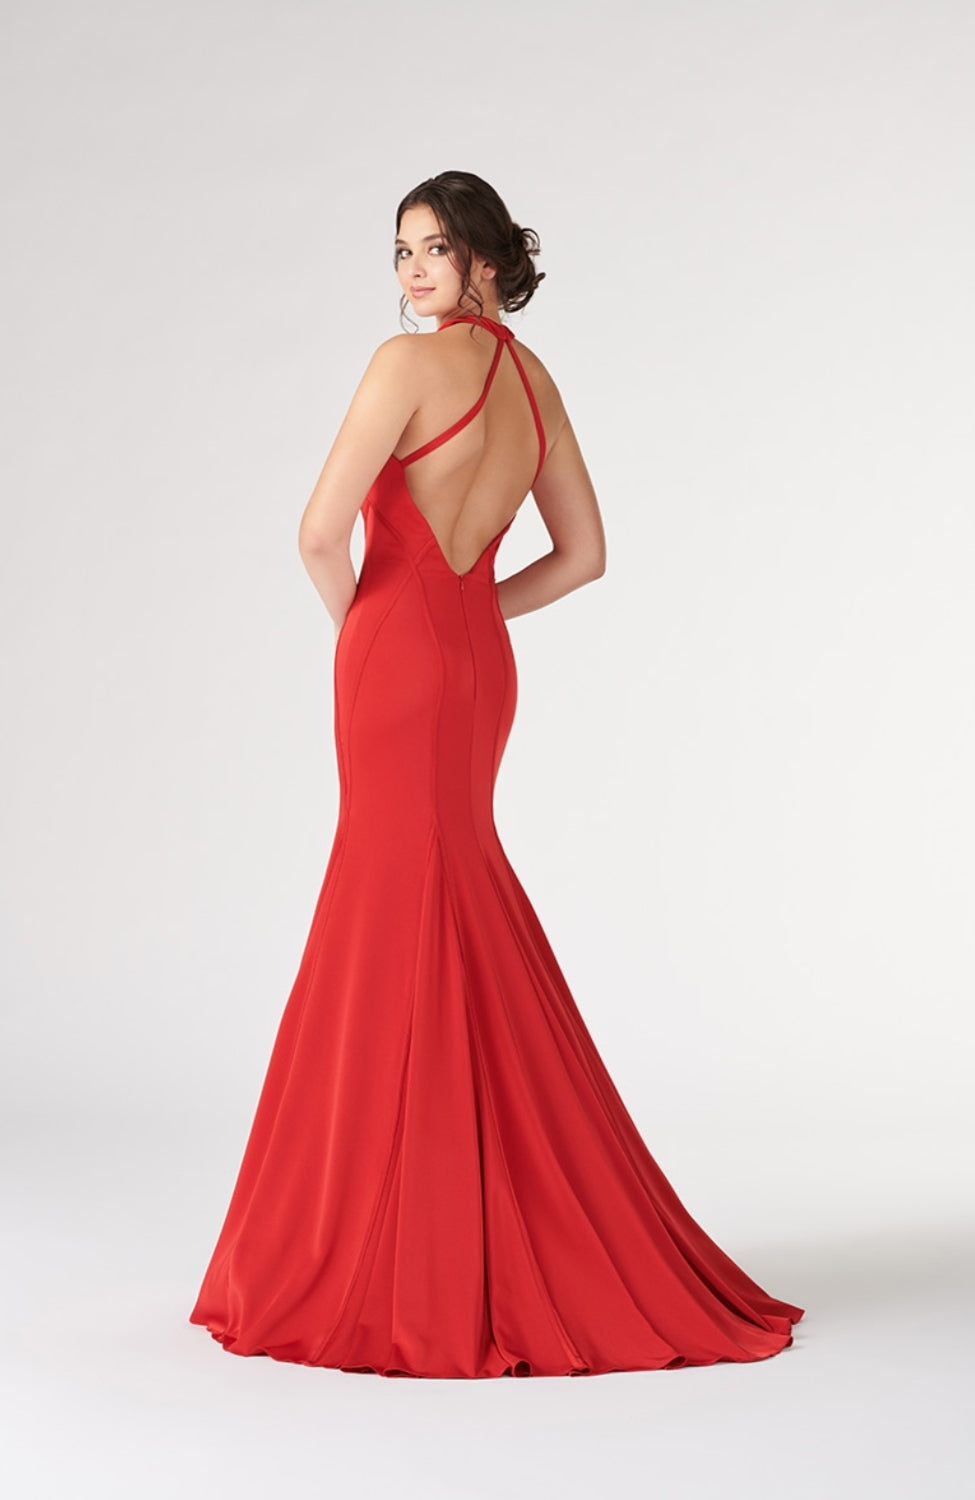 MON CHERI red high neck with keyhole and low back strappy RRP £550